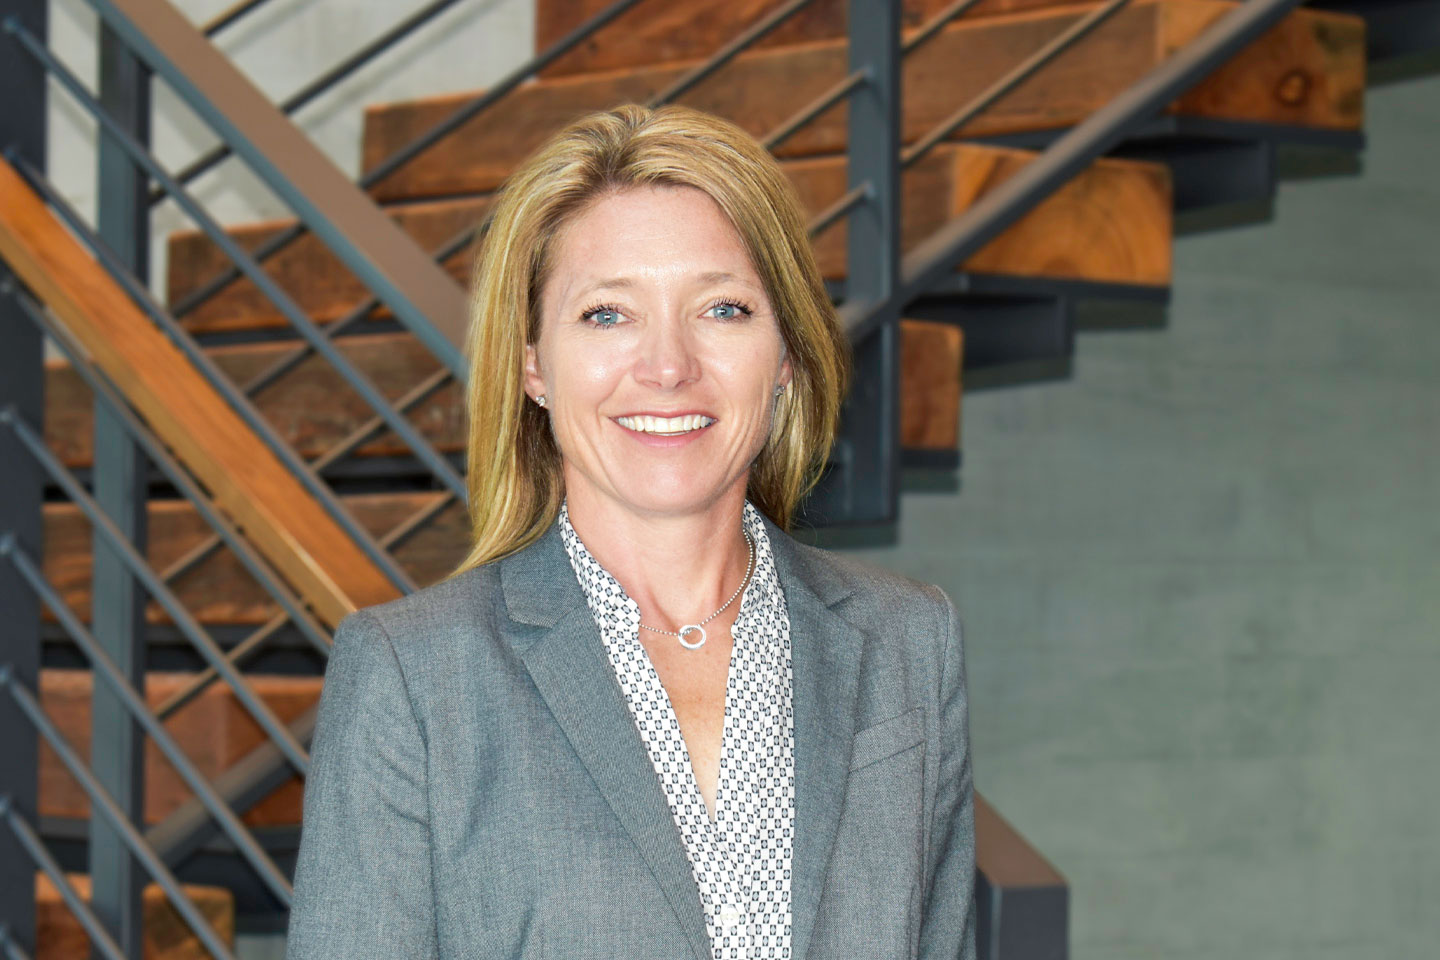 C.D. Smith Construction SVP Holly Brenner Q&A in BizTimes, Milwaukee Business News